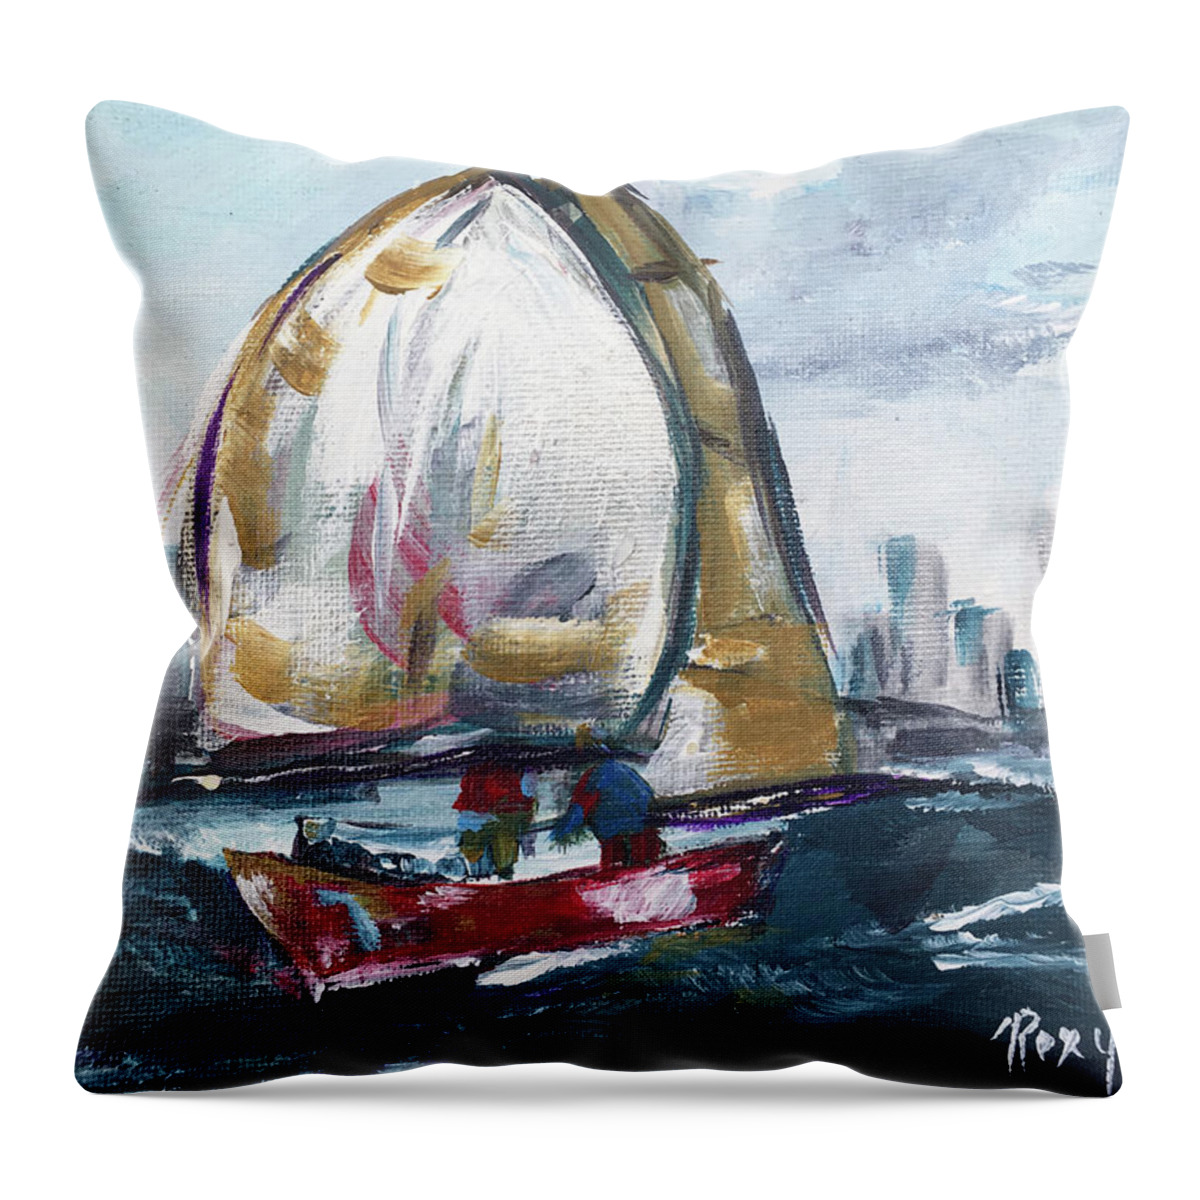 Big Sail Throw Pillow featuring the painting Hudson Sailing by Roxy Rich